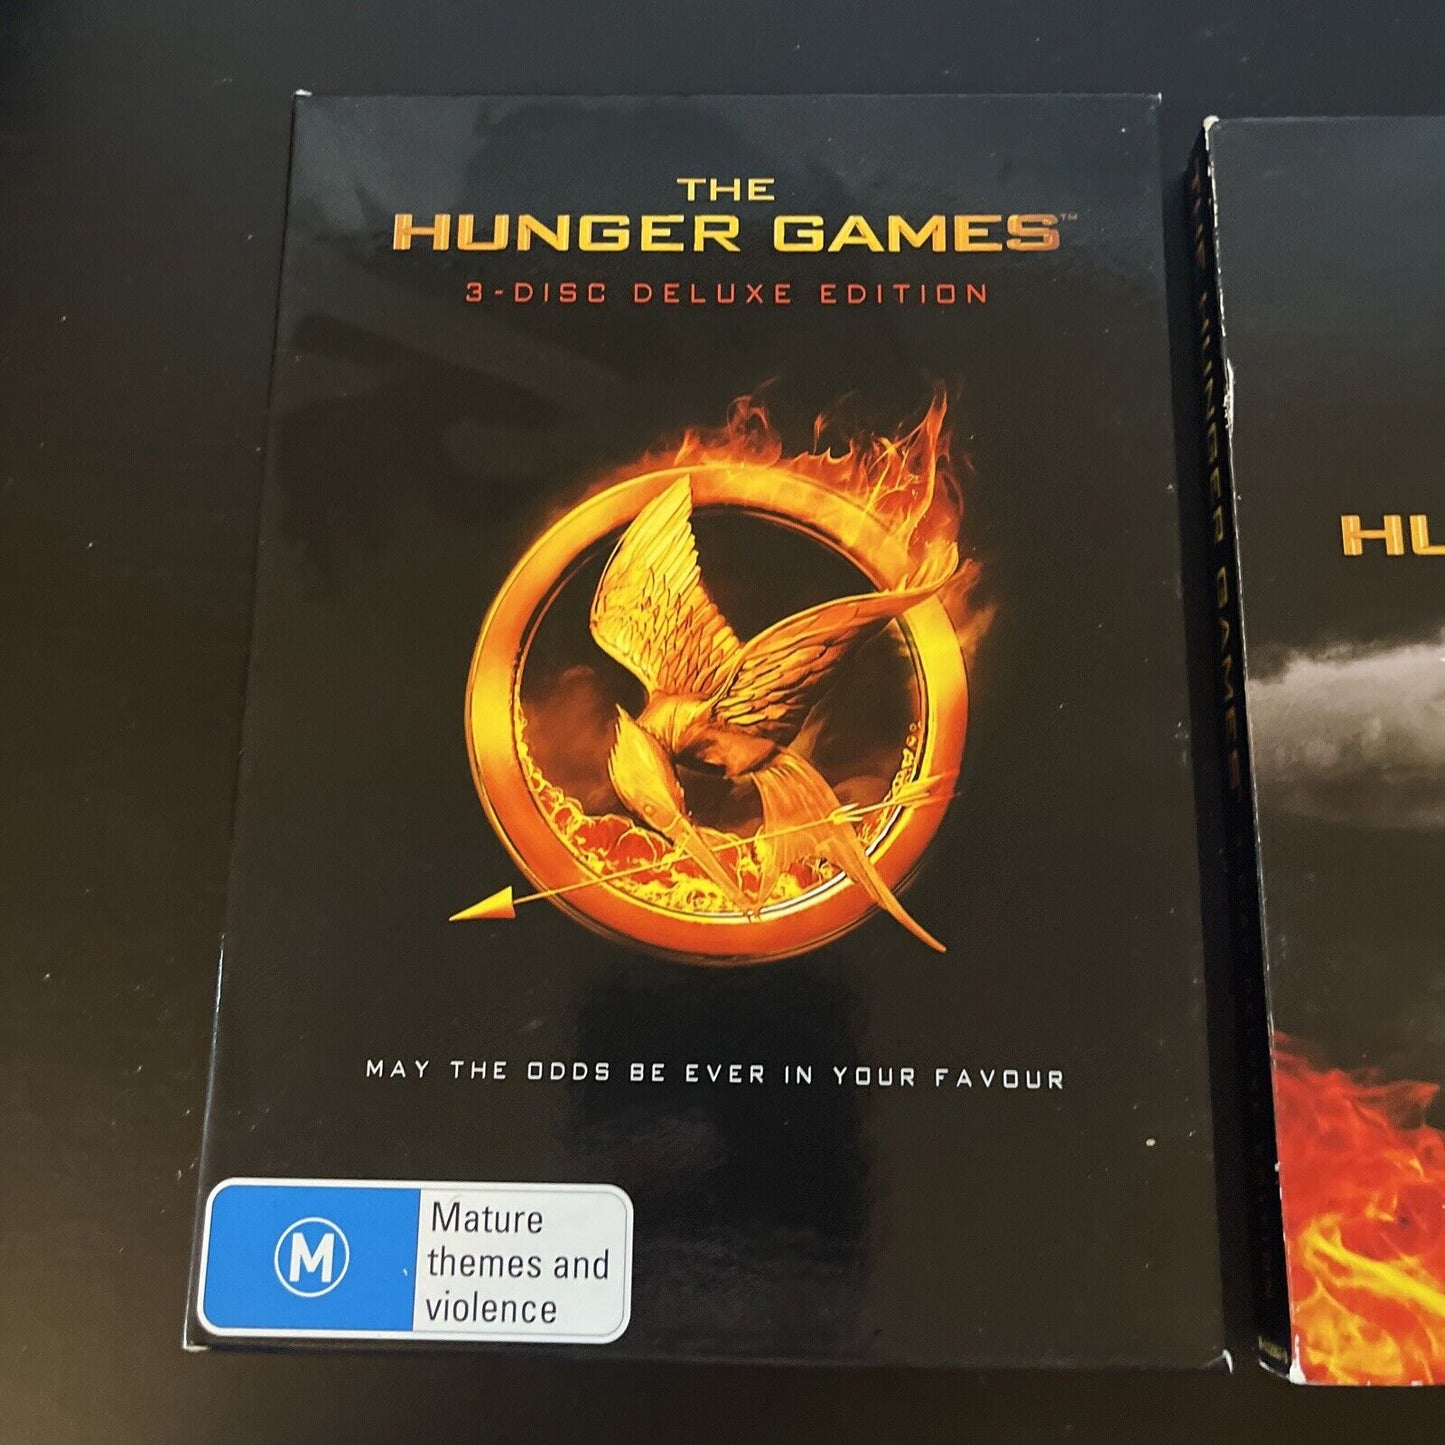 The Hunger Games - Deluxe Edition (DVD, 2011, 3-Disc) Jennifer Lawrence Region 4